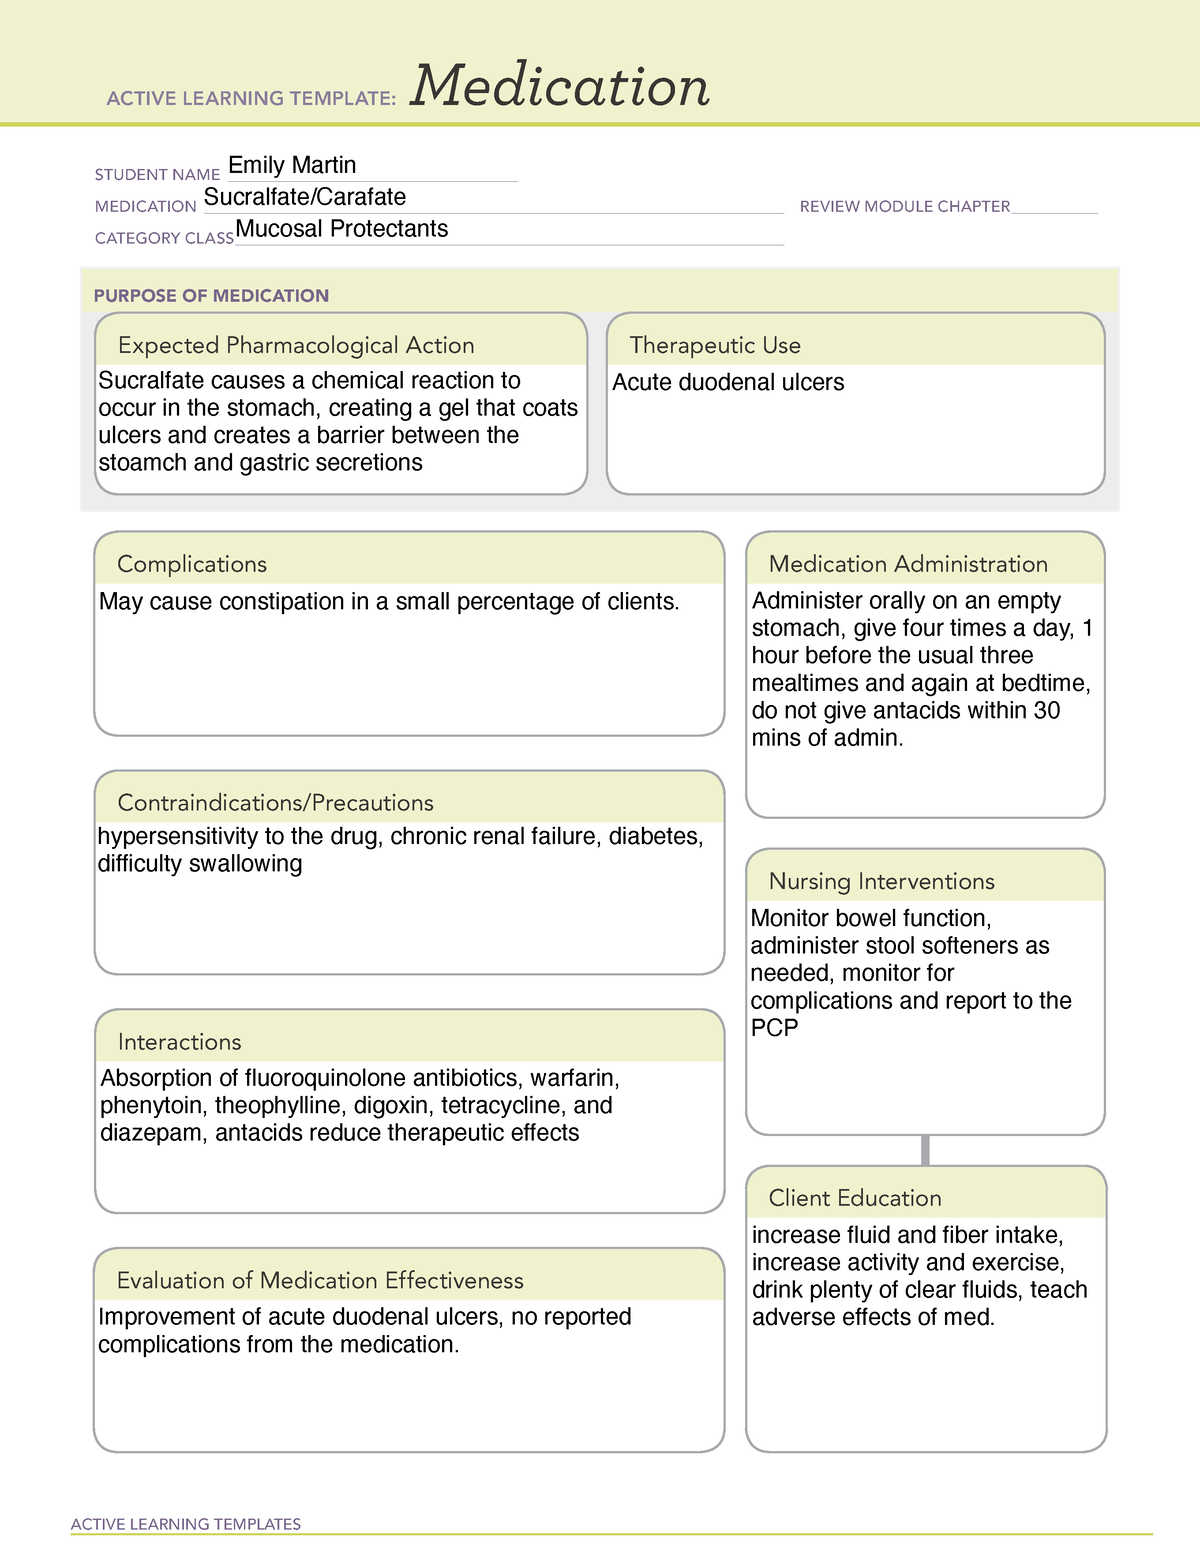 Sucralfate:Carafate ATI Gastrointestinal Drug Card Review Template on